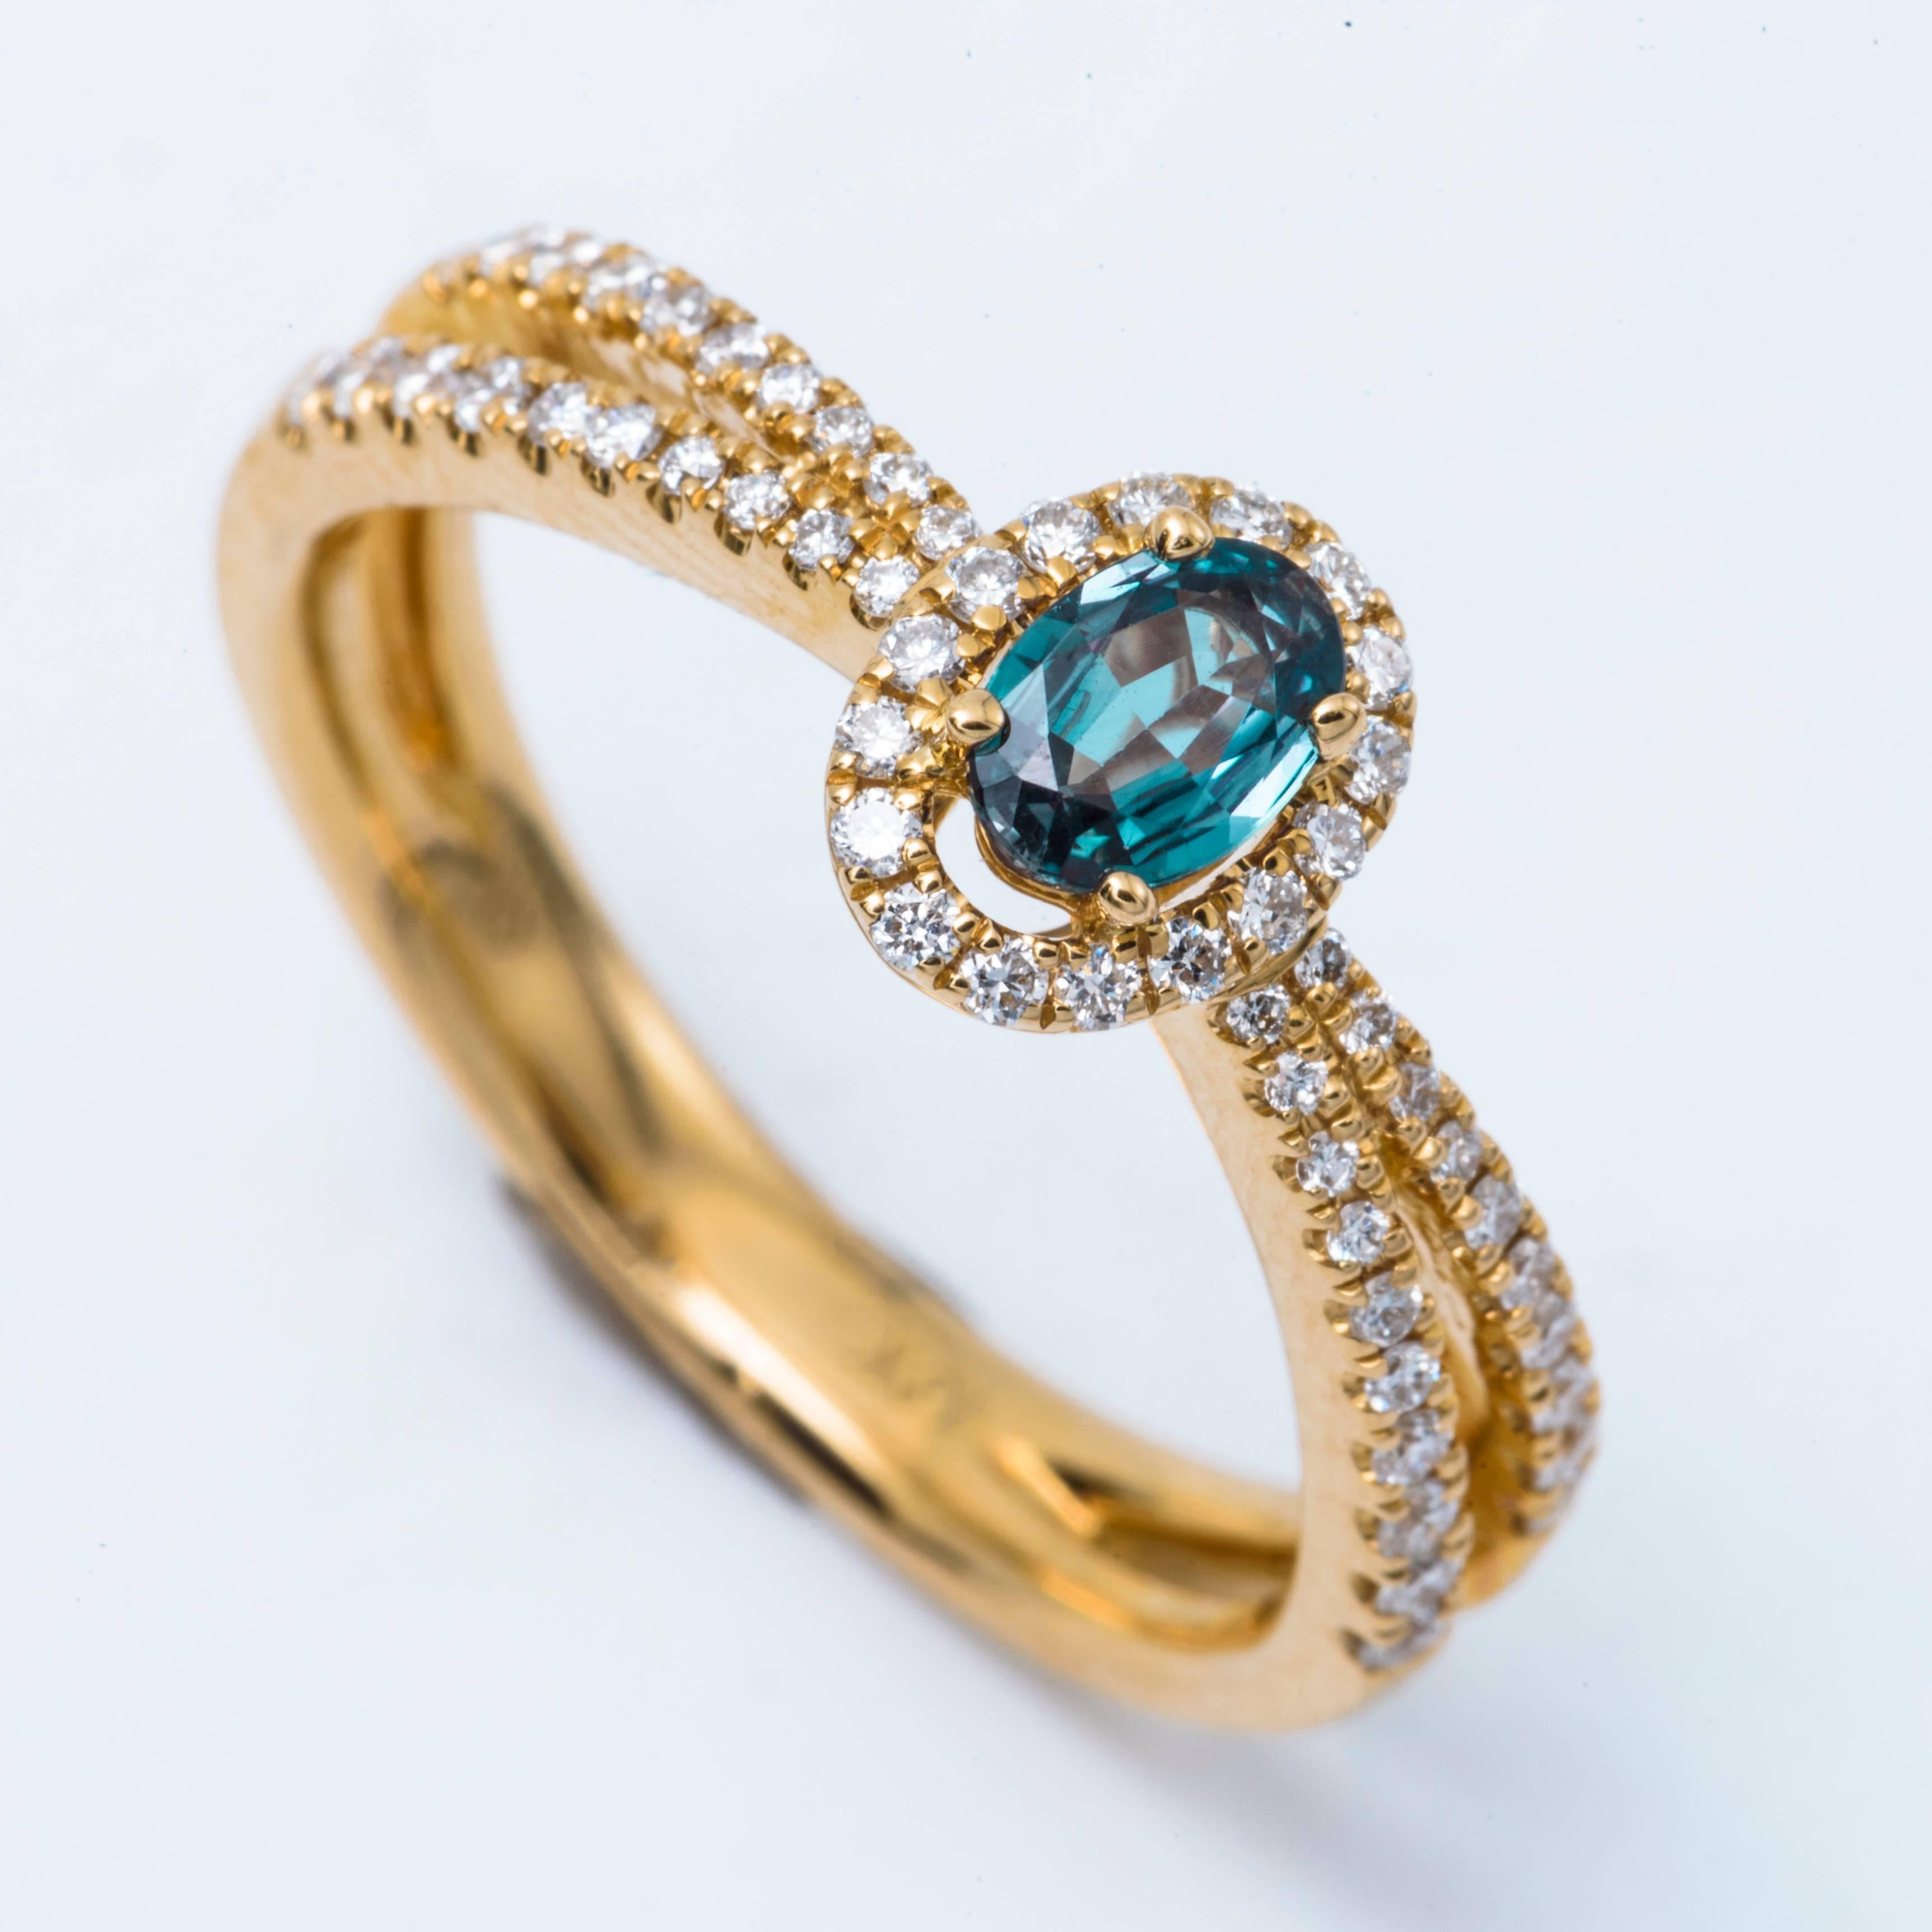 Oval Cut Oval Alexandrite and Diamond Ring with 18 Karat Yellow Gold